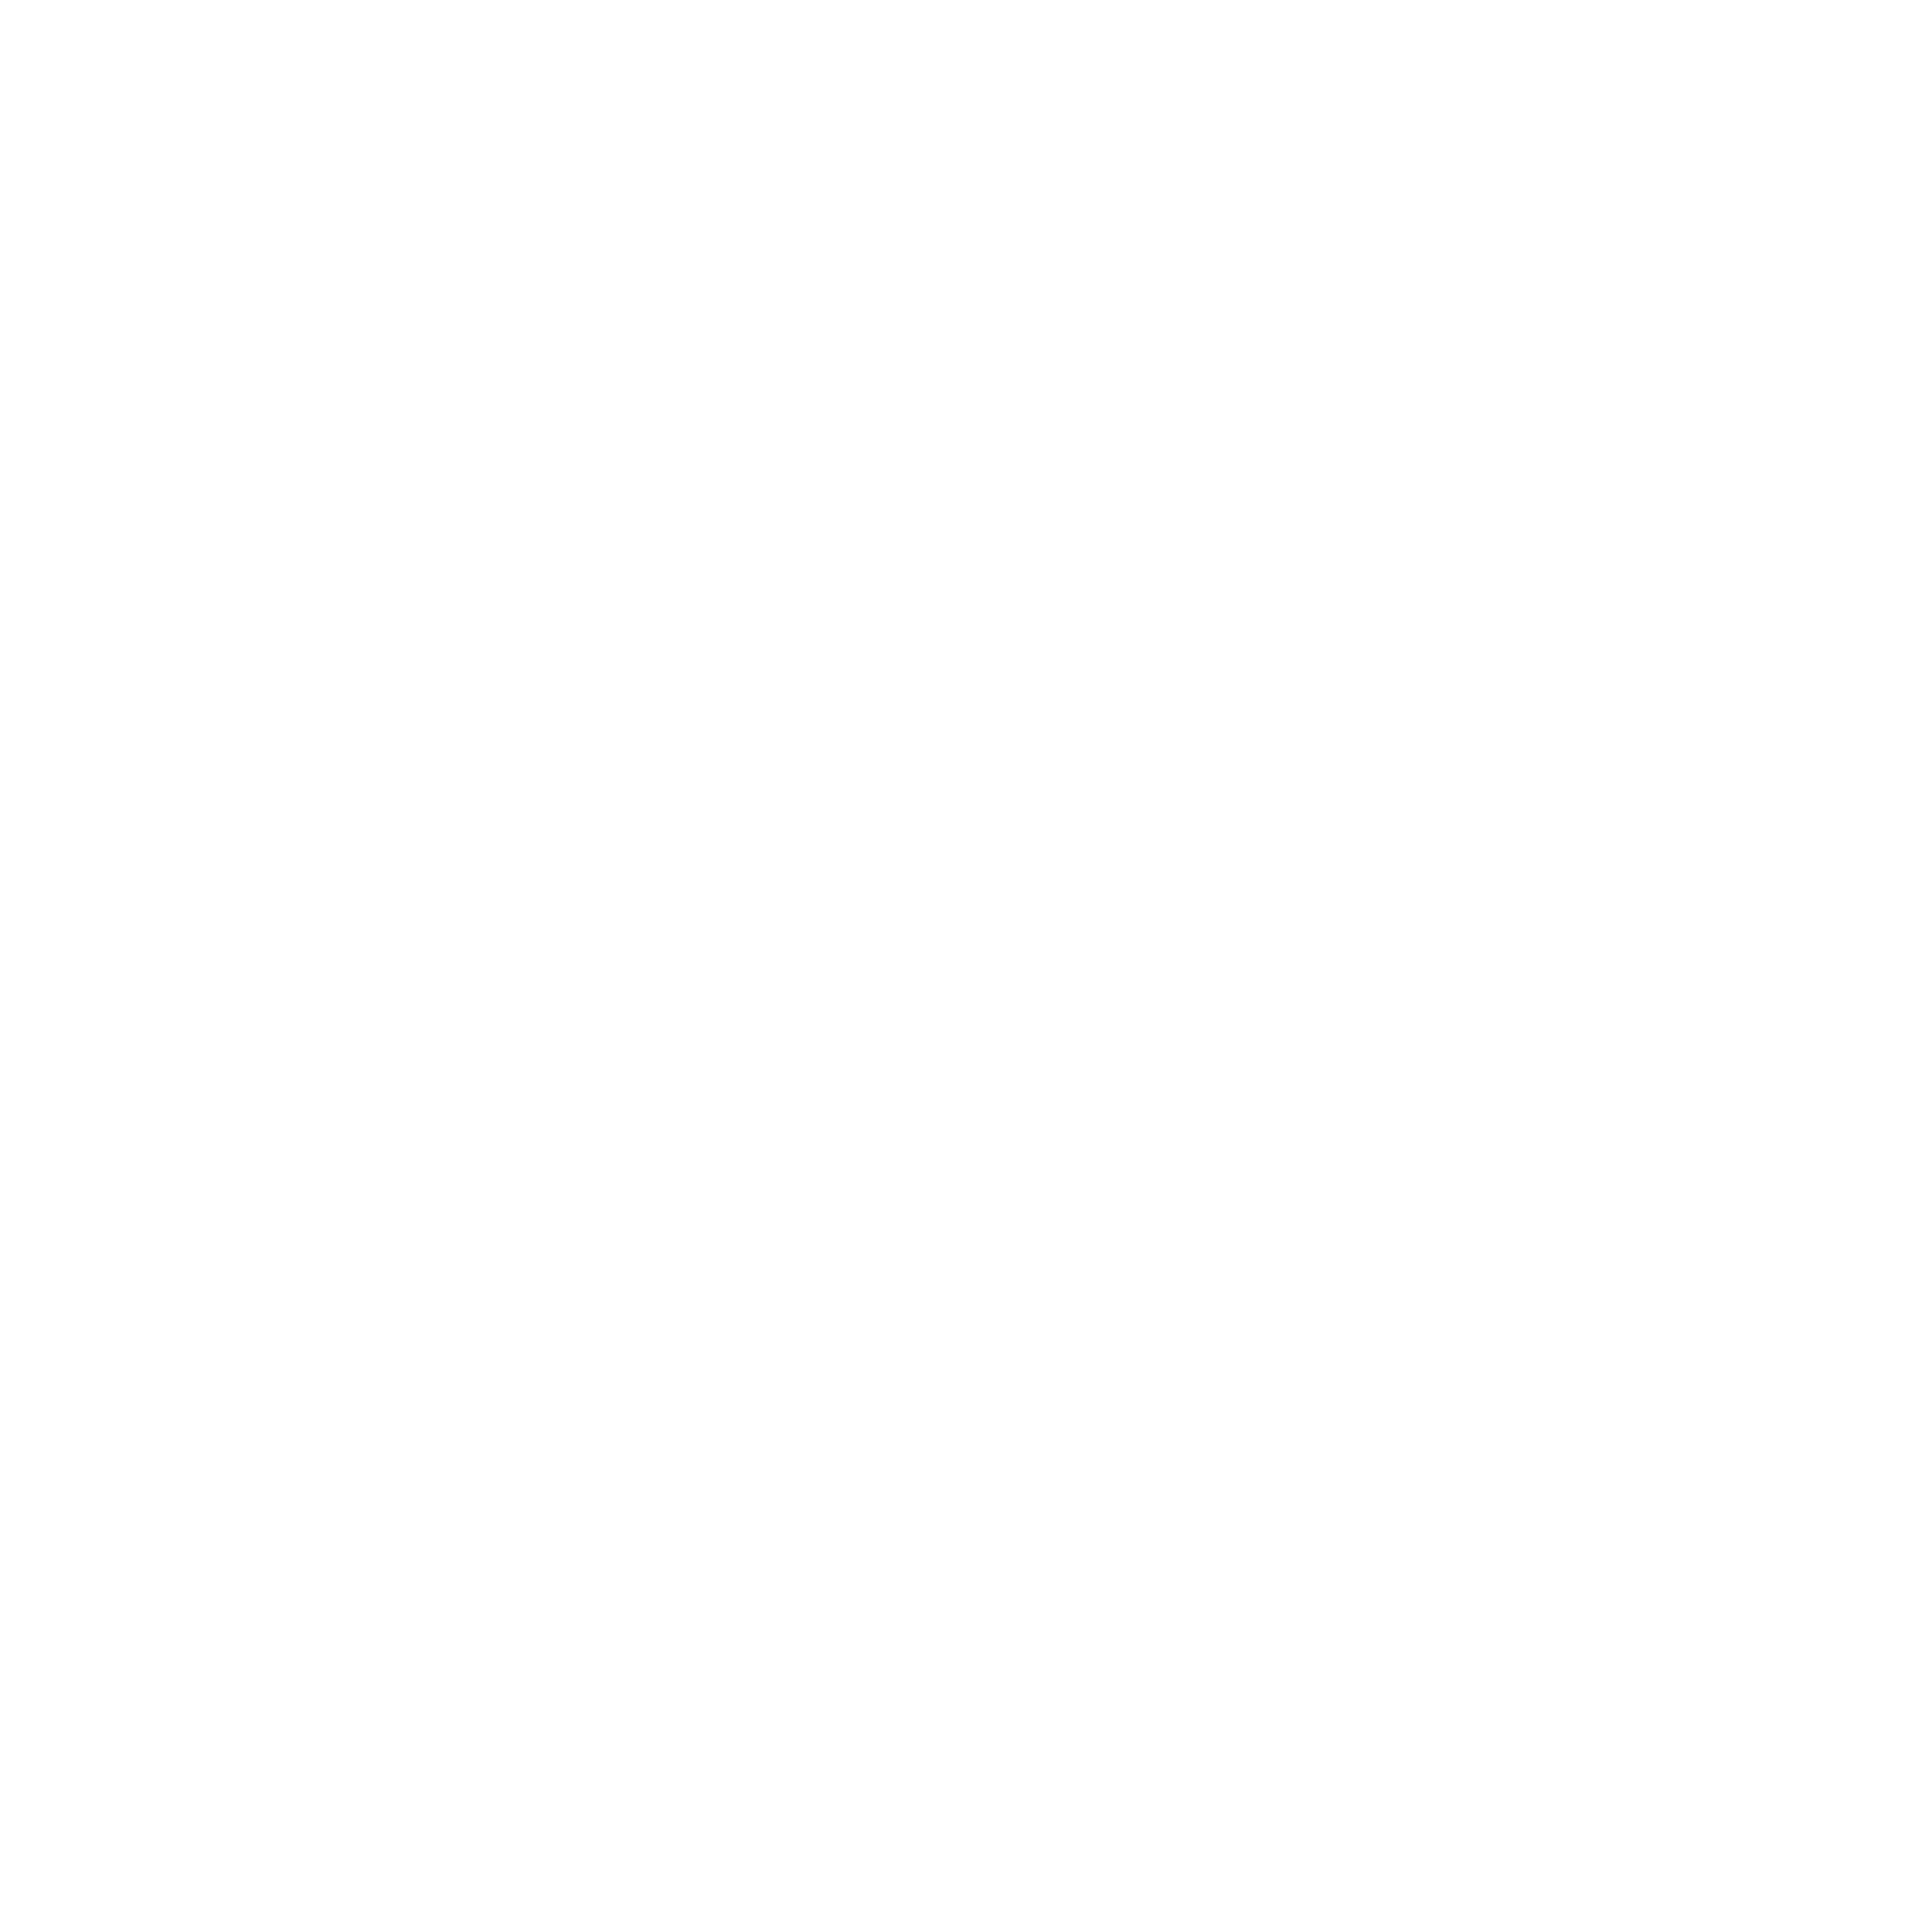 BMG-SERVICES